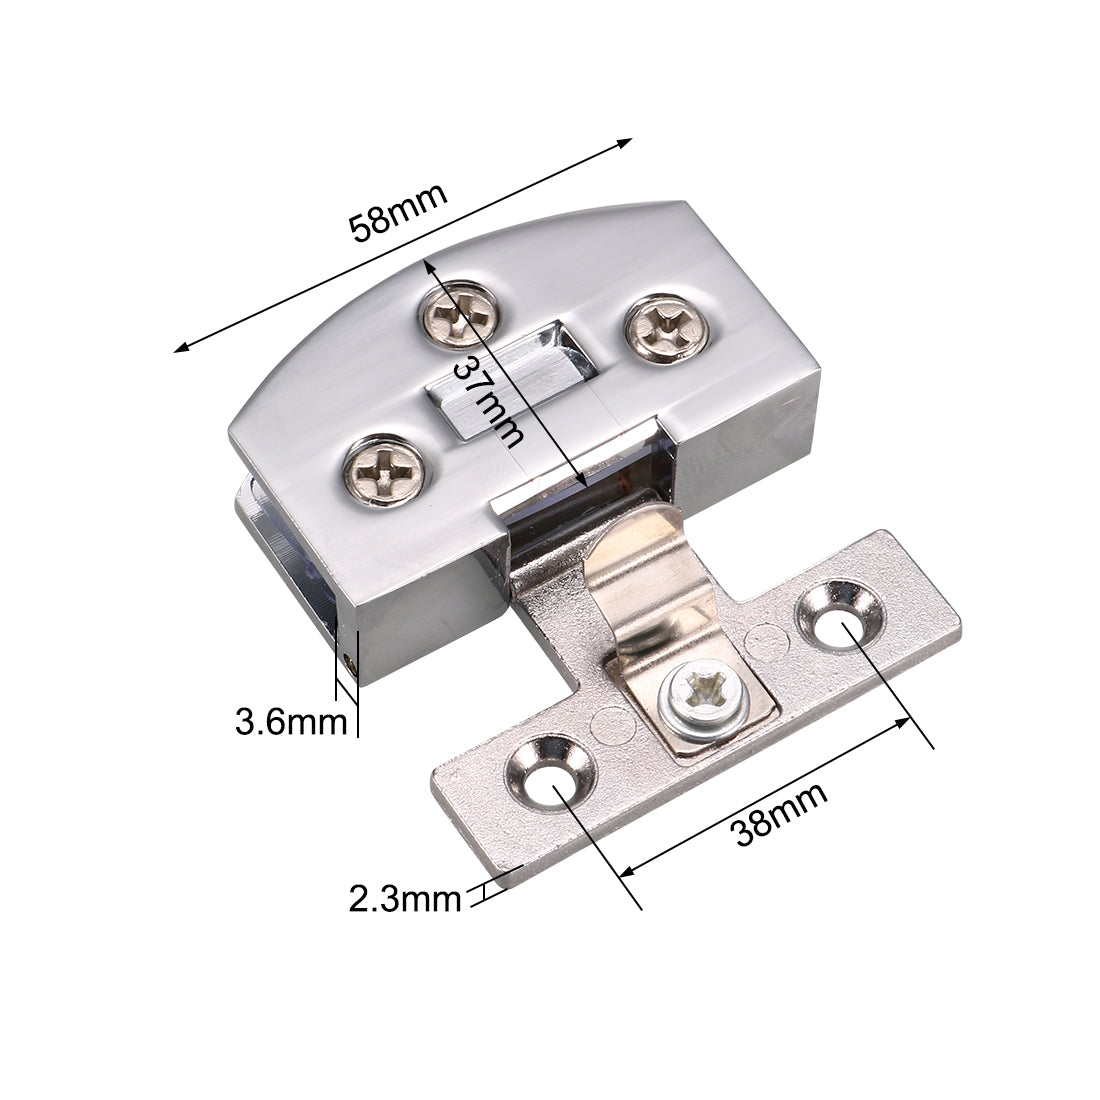 uxcell Uxcell Glass Door Hinge Cupboard Showcase Cabinet Door Hinge Glass Clamp Zinc Alloy for 5-8mm Thickness 4pcs